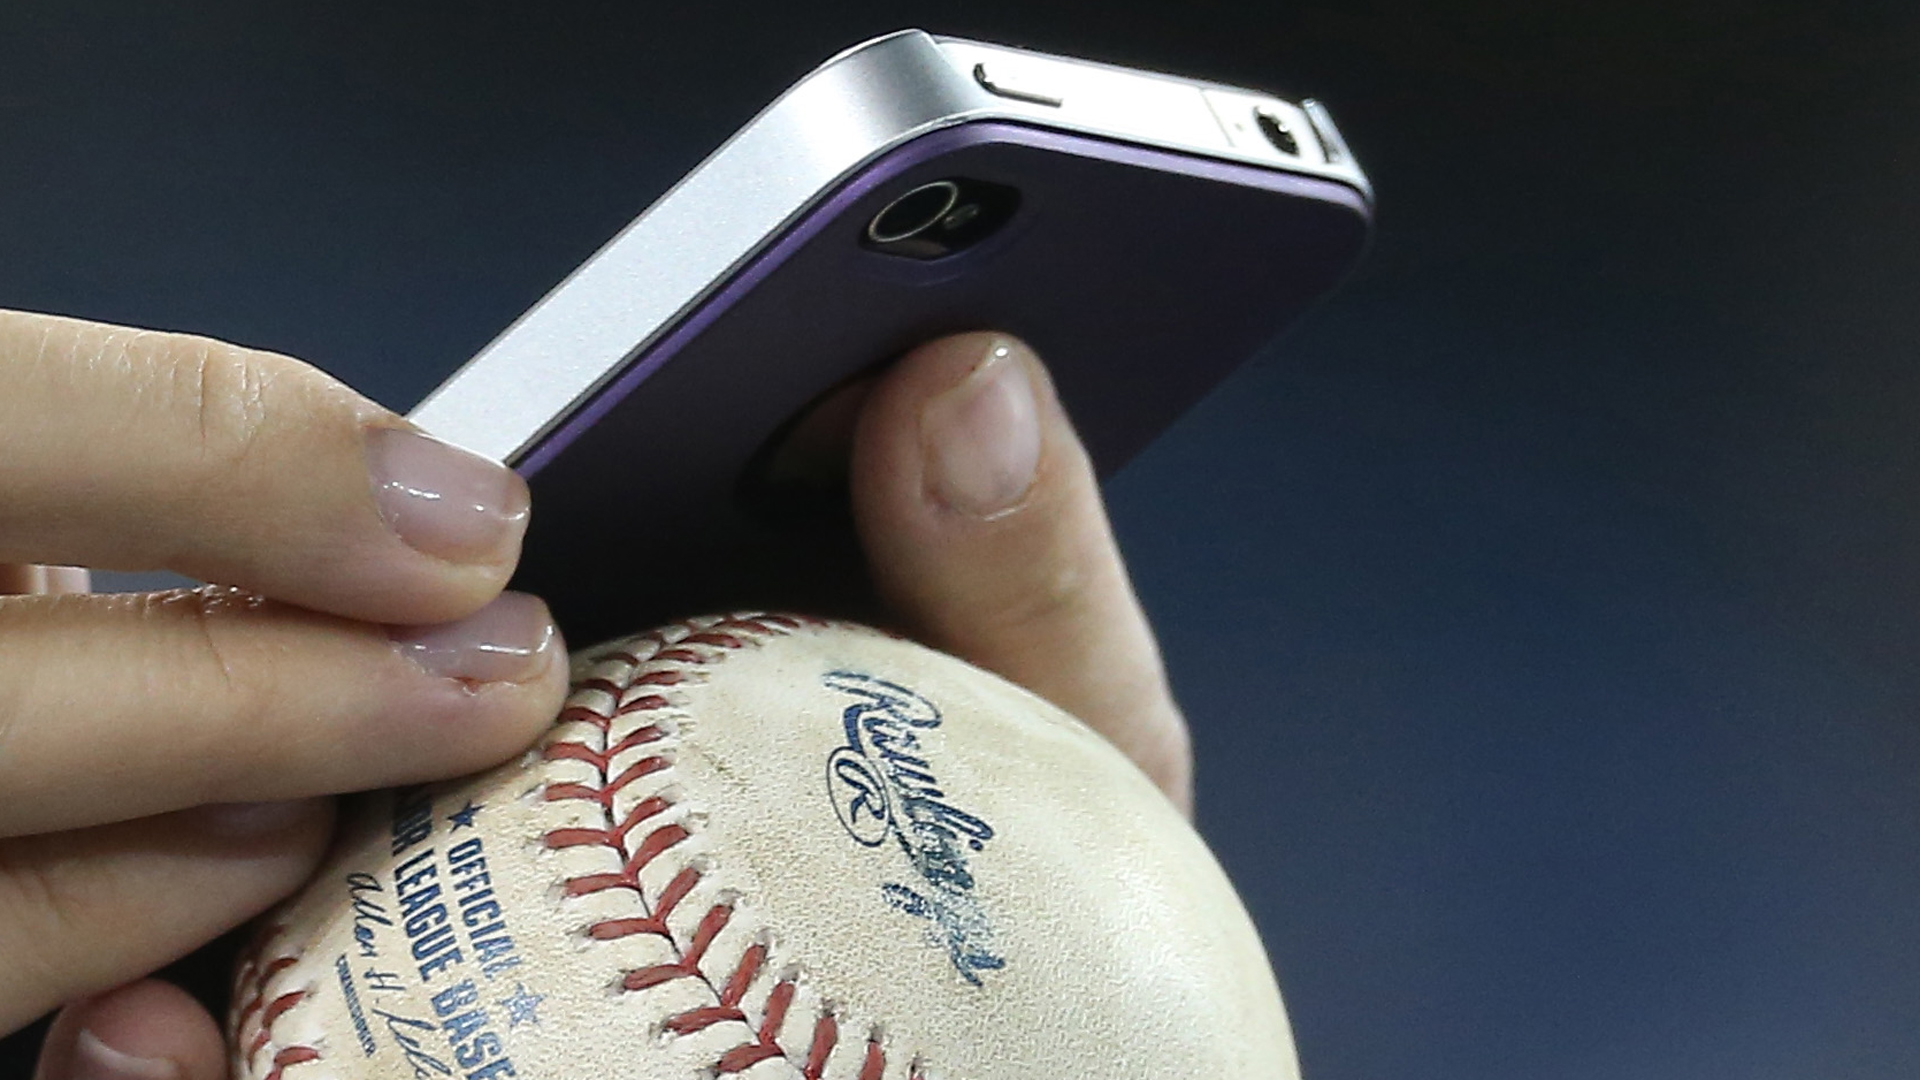 Mariners fans asked to keep eyes off cell phones for safety krem